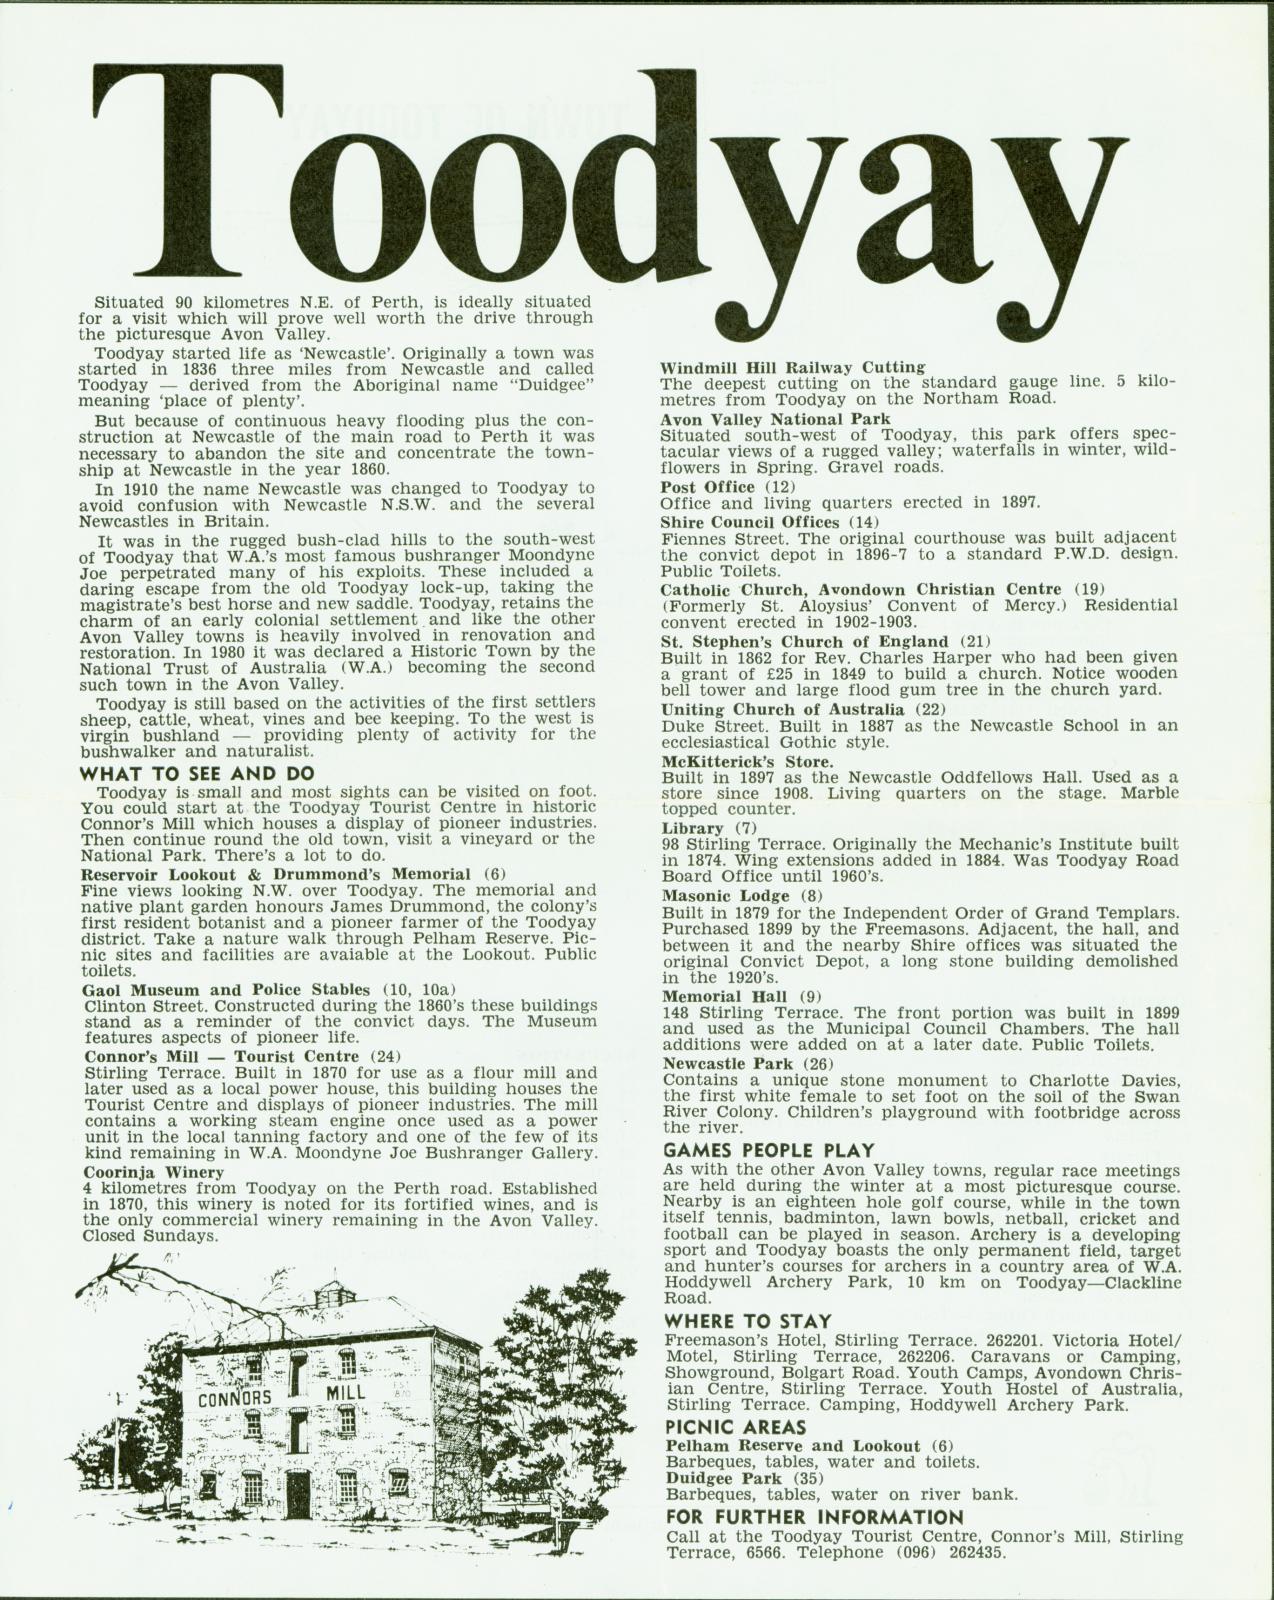 Toodyay tourist brochure & map, side 1